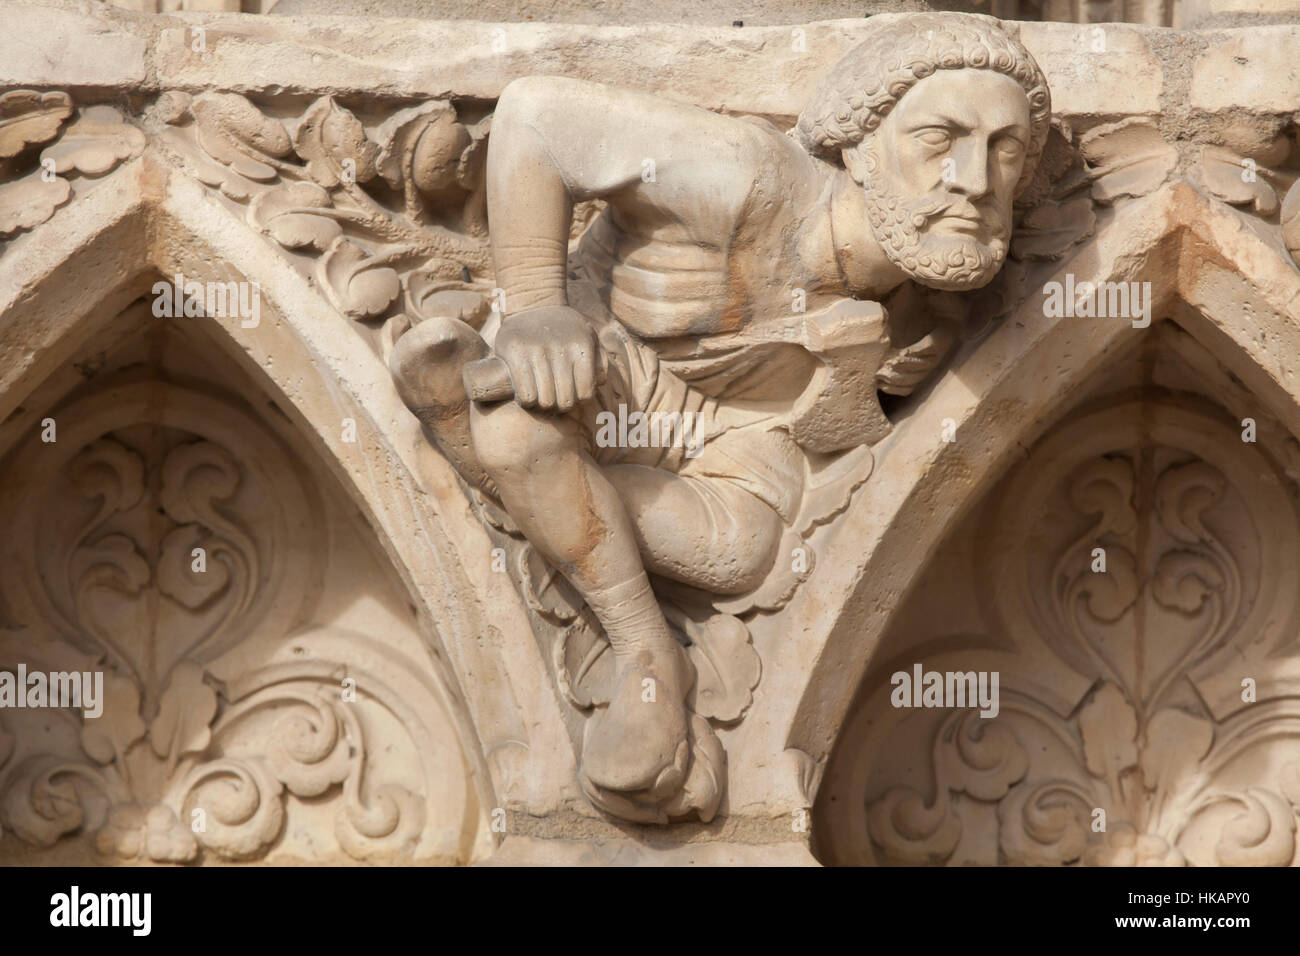 Man with an axe. Neo-Gothic on the main facade of the Cathedral (Notre-Dame de Paris) Paris, France. damaged Gothic portal was restored by French architects Eugene Viollet-le-Duc and